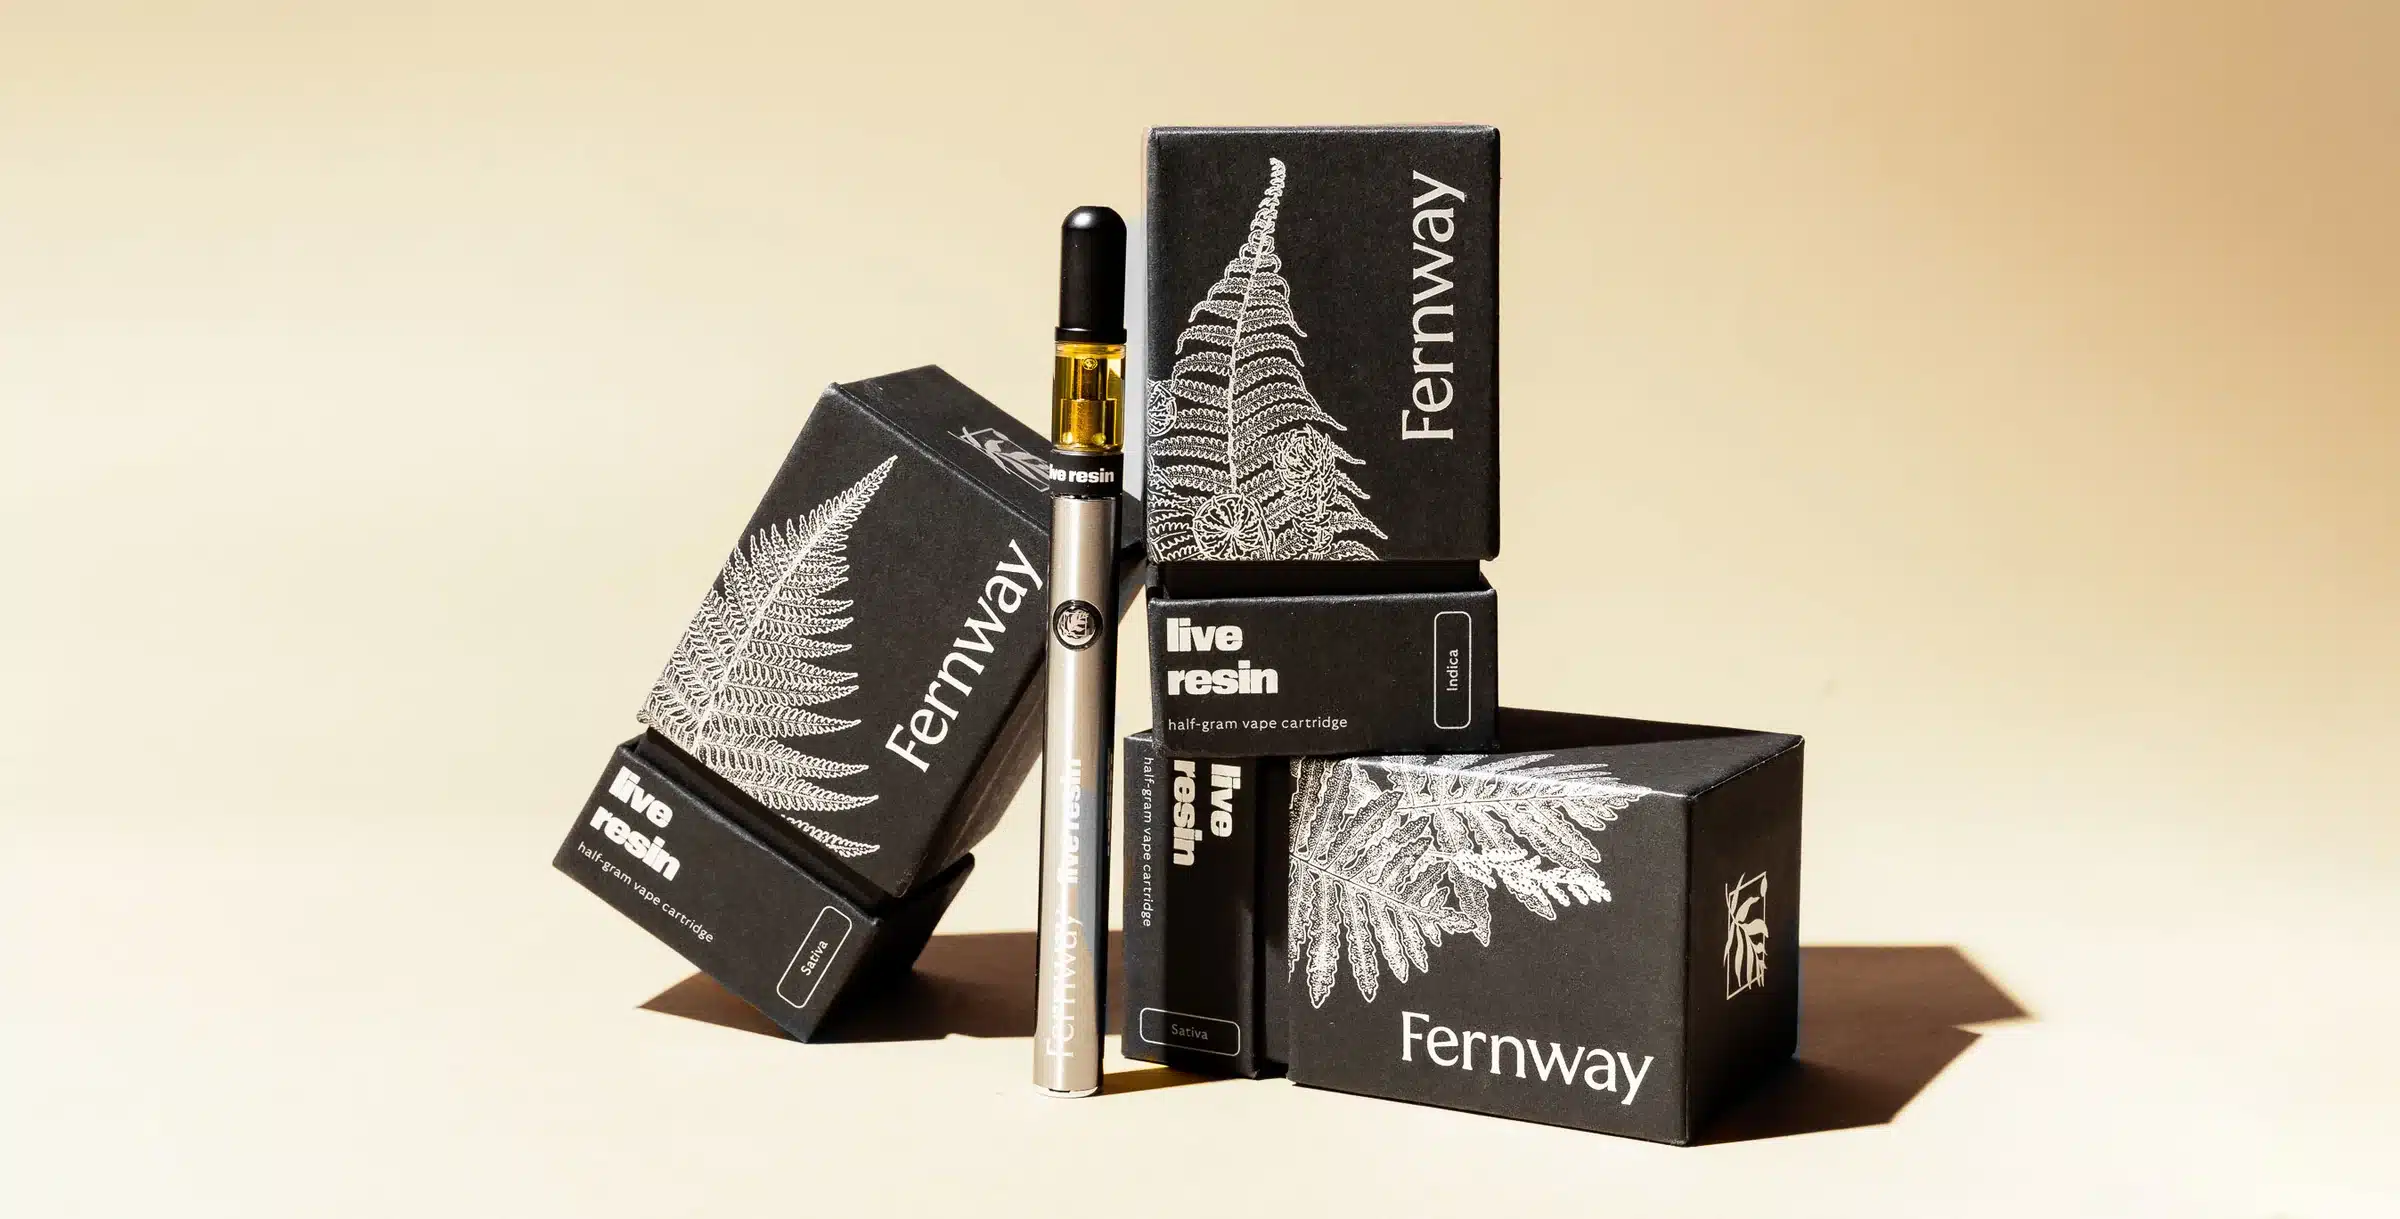 Fernway joints on a wooden slab